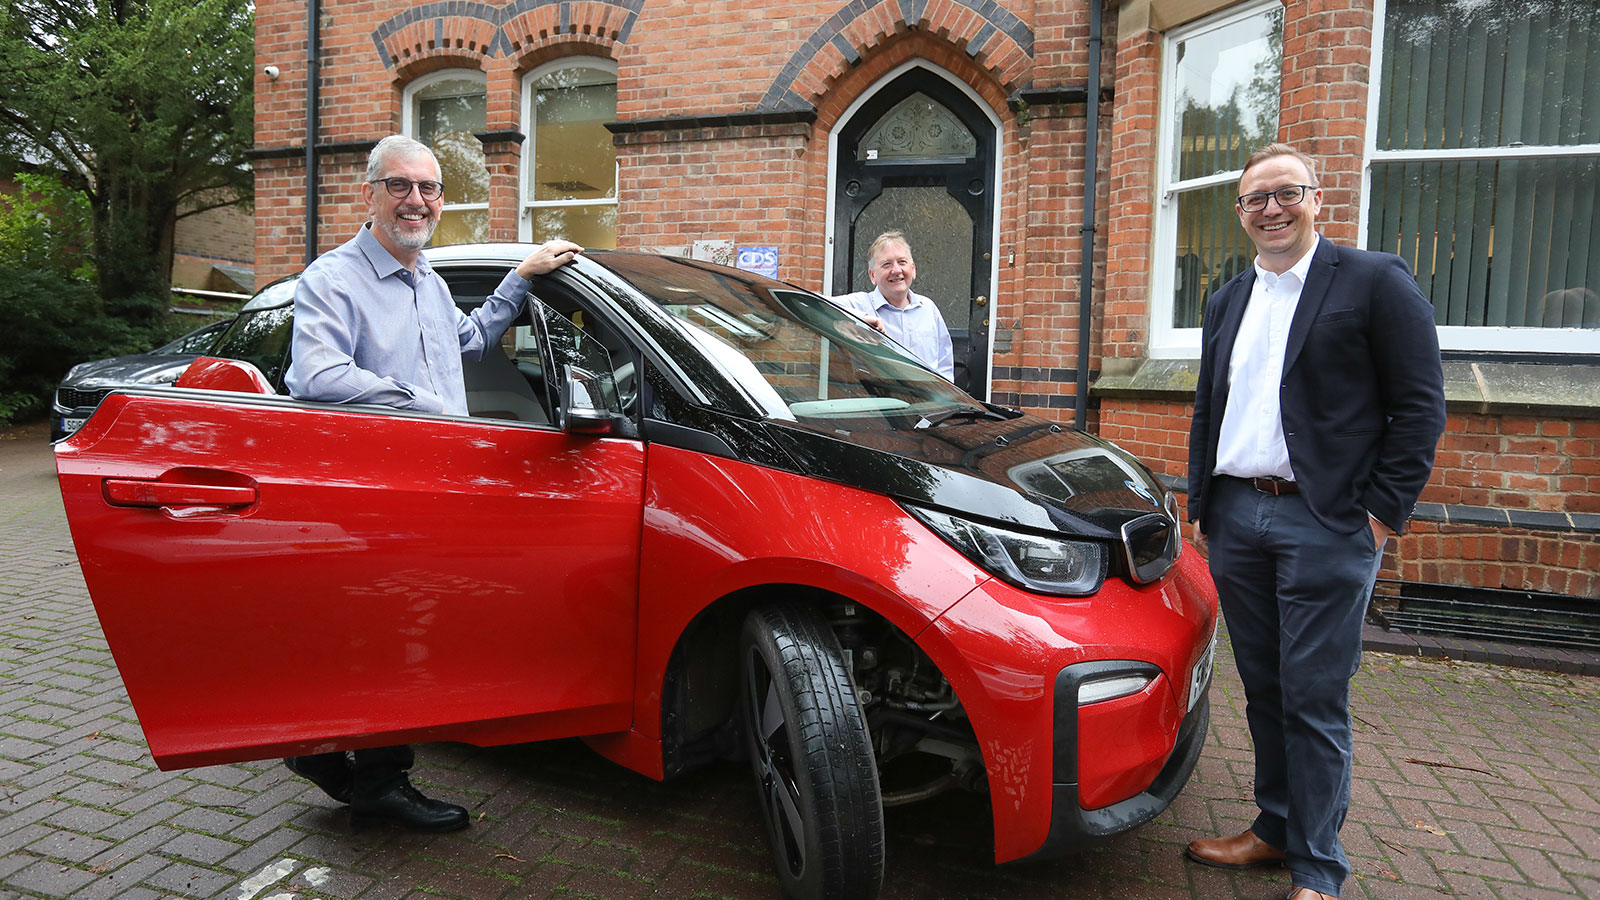 CDS plans hybrid and allelectric vehicle fleet as part of broader